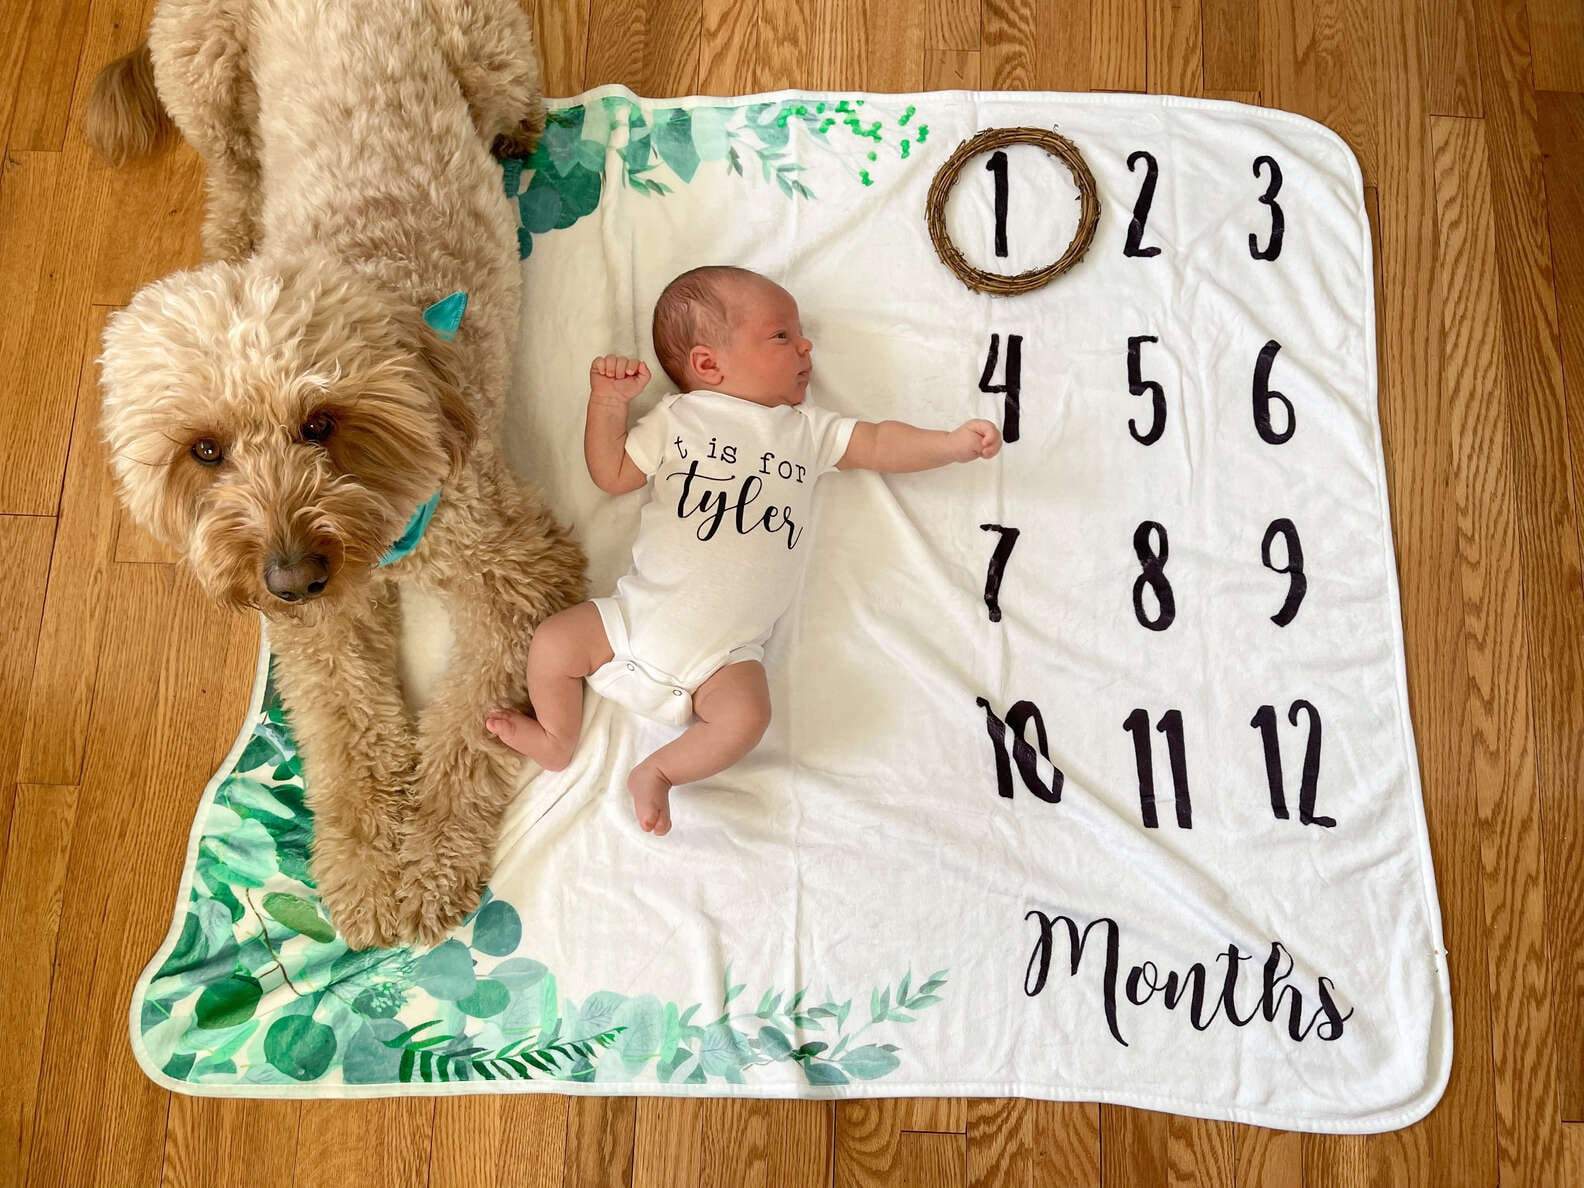 goldendoodle with baby on a sheet with months